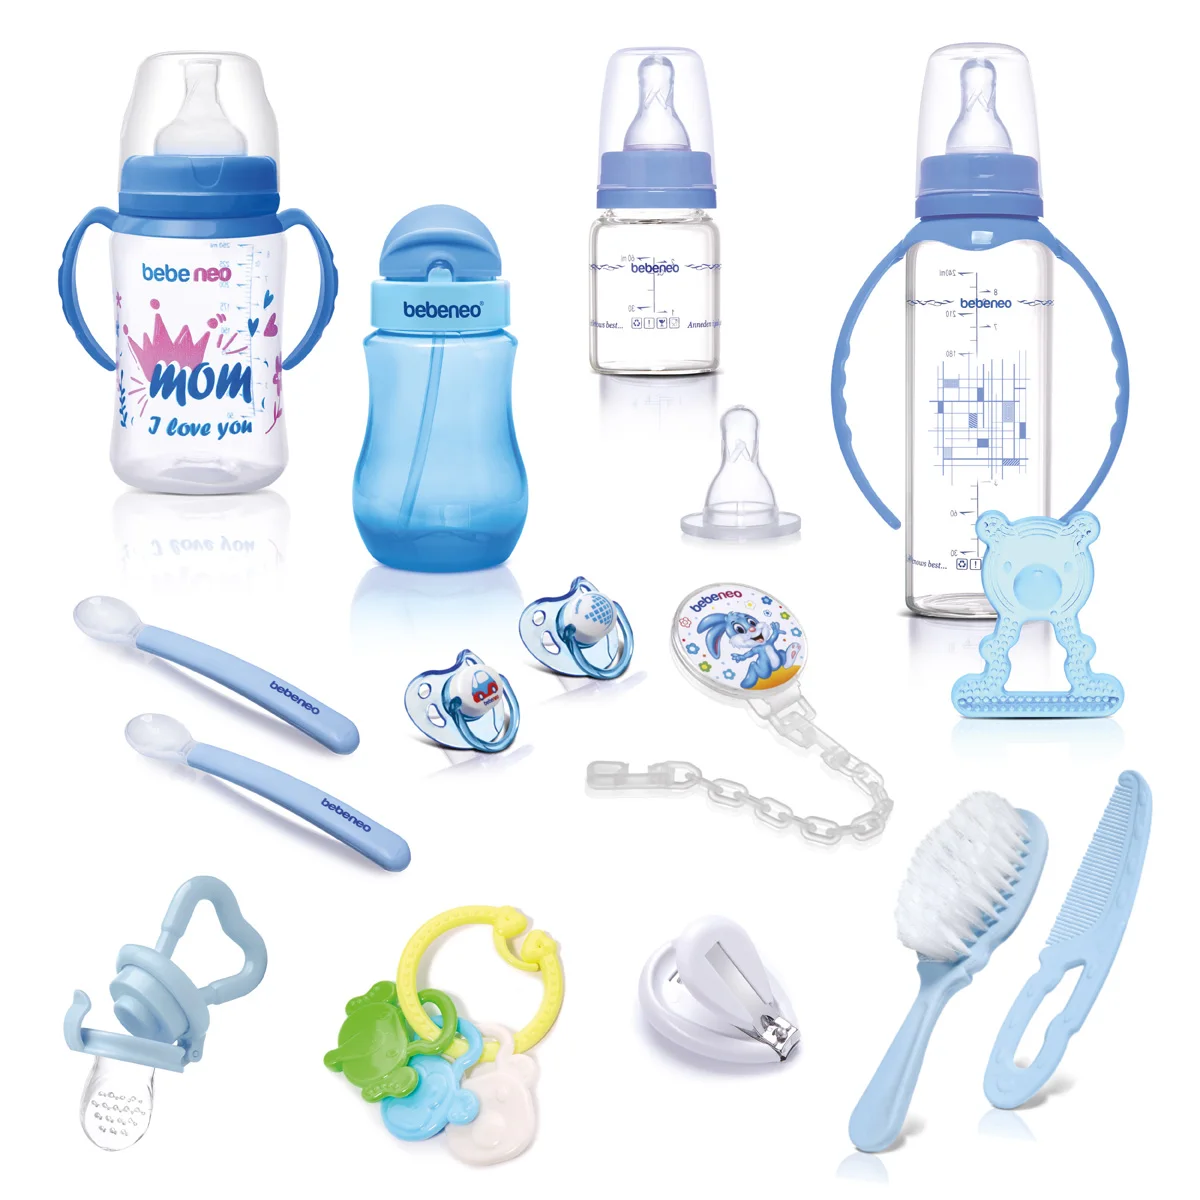 Newborn Baby Gift Set – Pacifier Feeding Bottle Super Set – 16 Piece Gift Box Economic Quality Complete Baby Care Set Pacifier